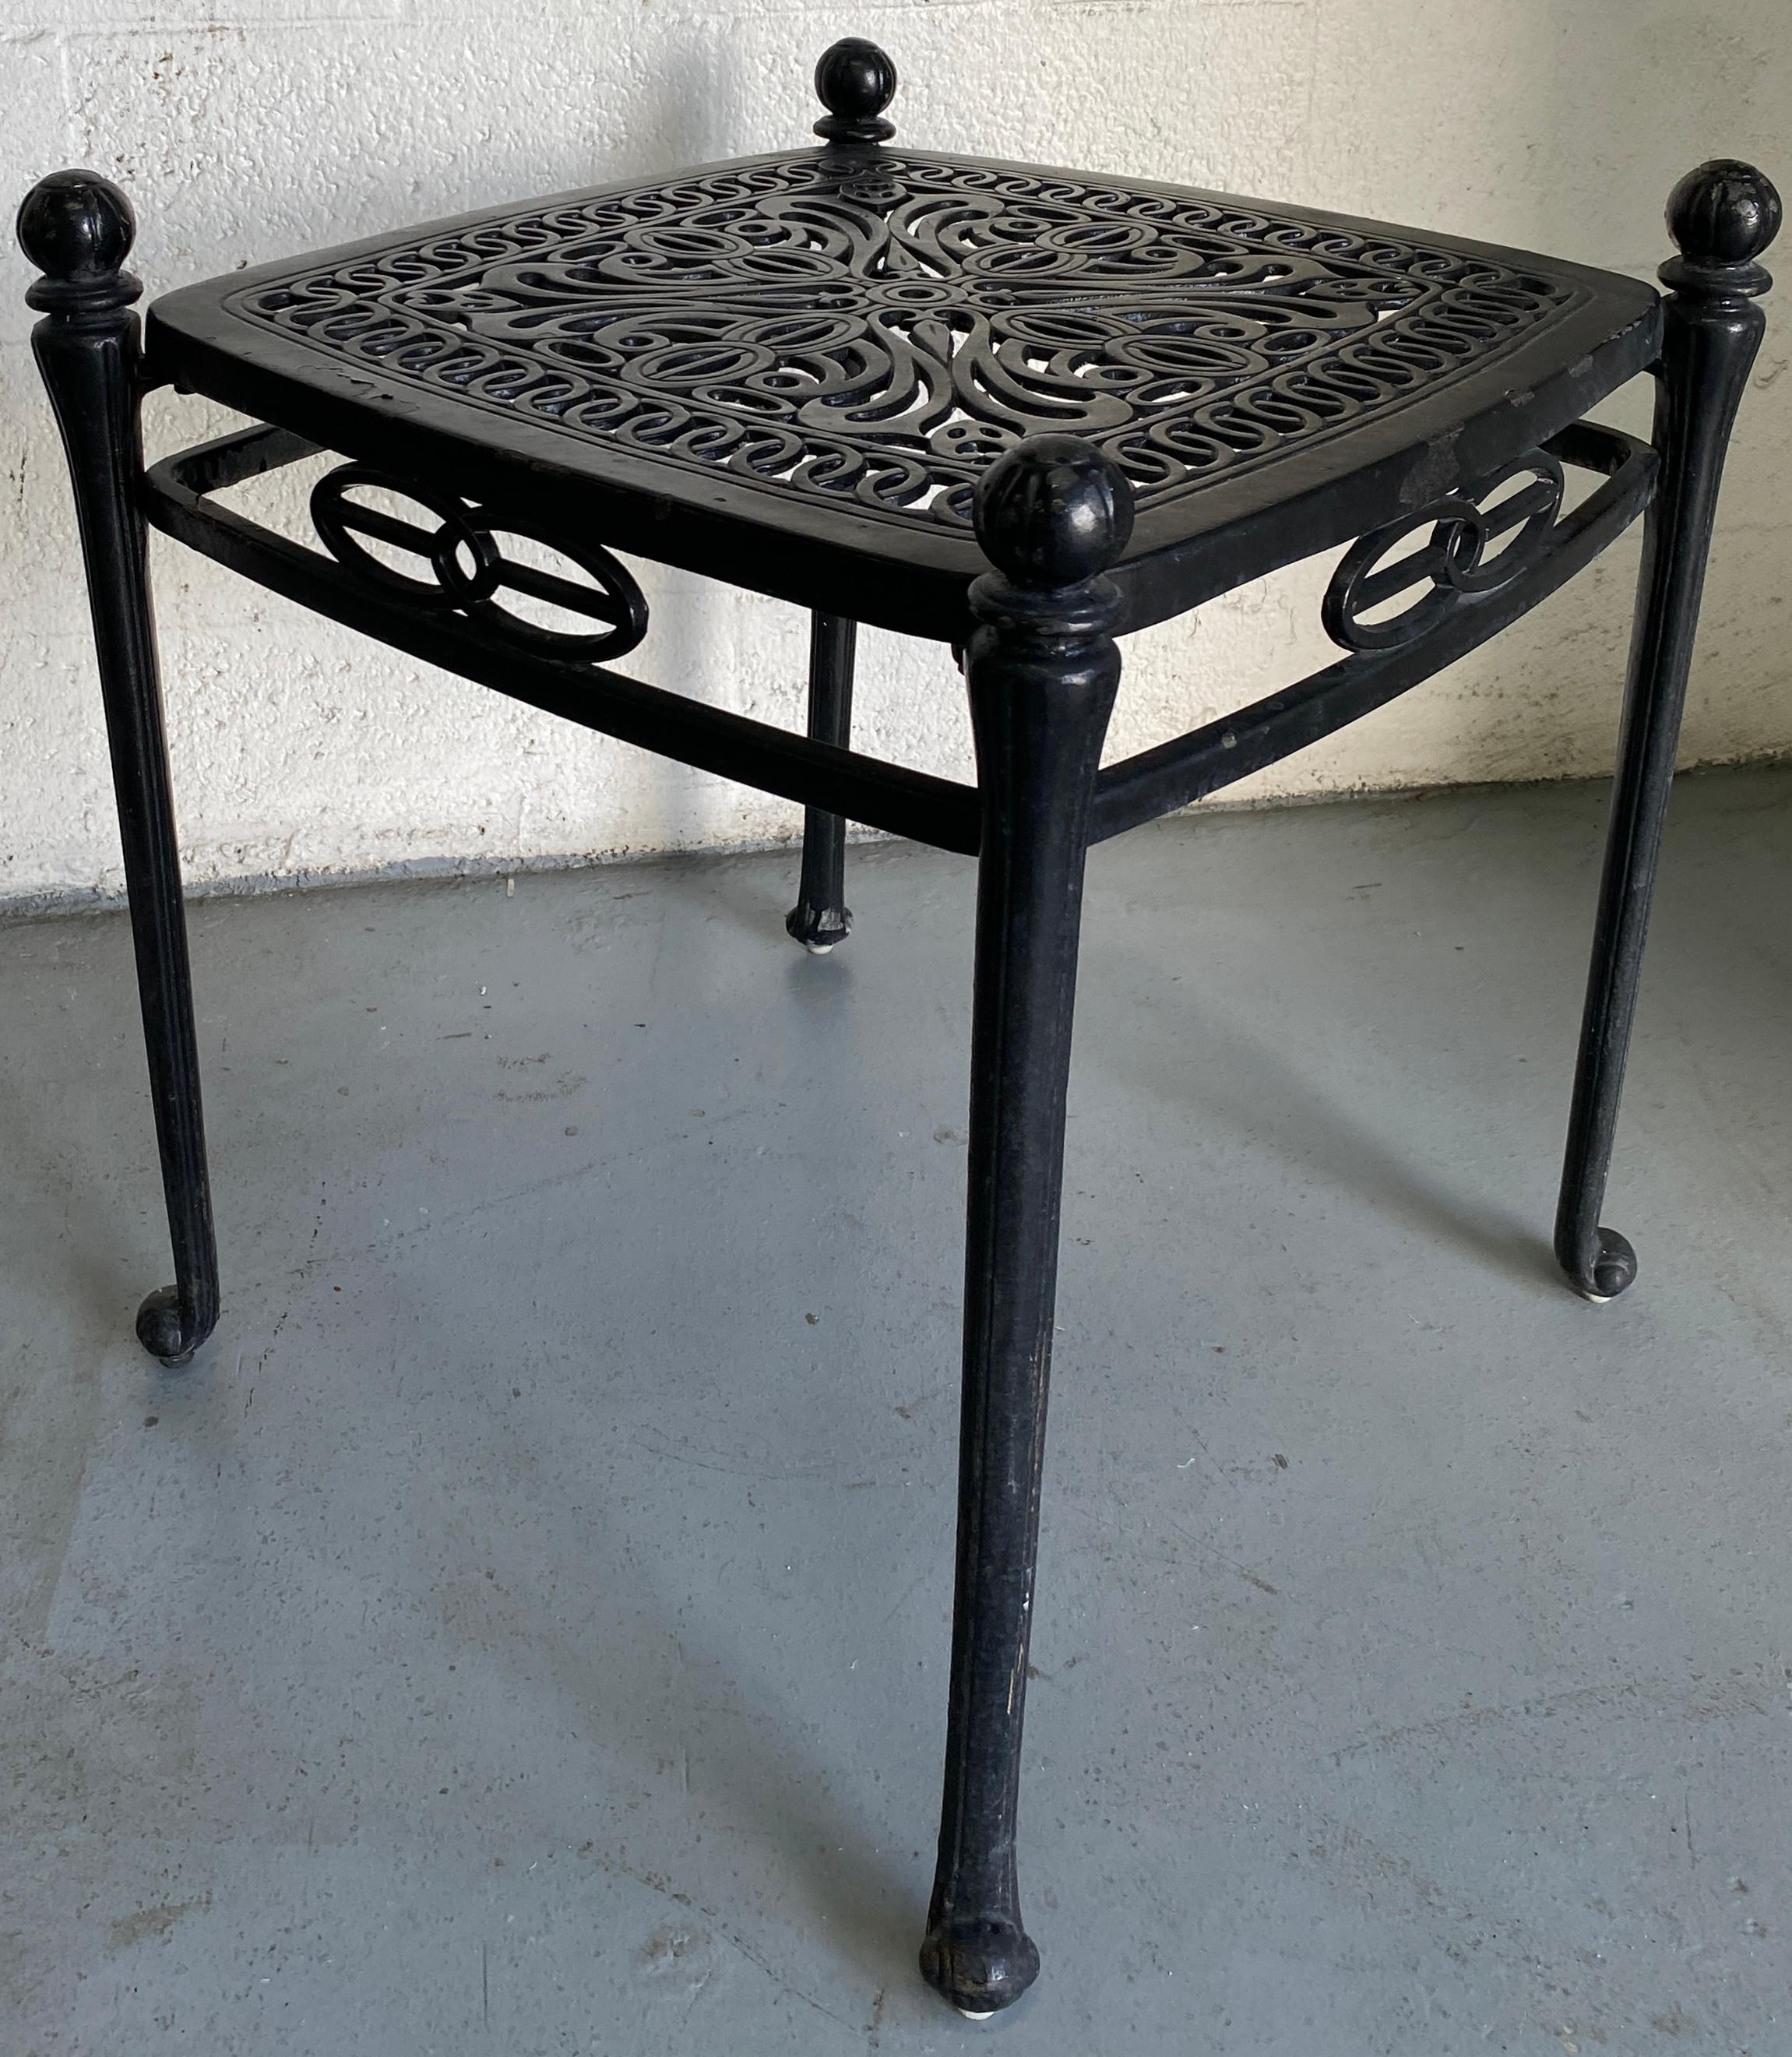 A stylish vintage Russell Woodard style garden set. This wonderful cast aluminum garden furniture set features 2 lounge chairs or chaise lounges plus an intricately detailed Salterini style scroll square garden accent table set. 

The accent table